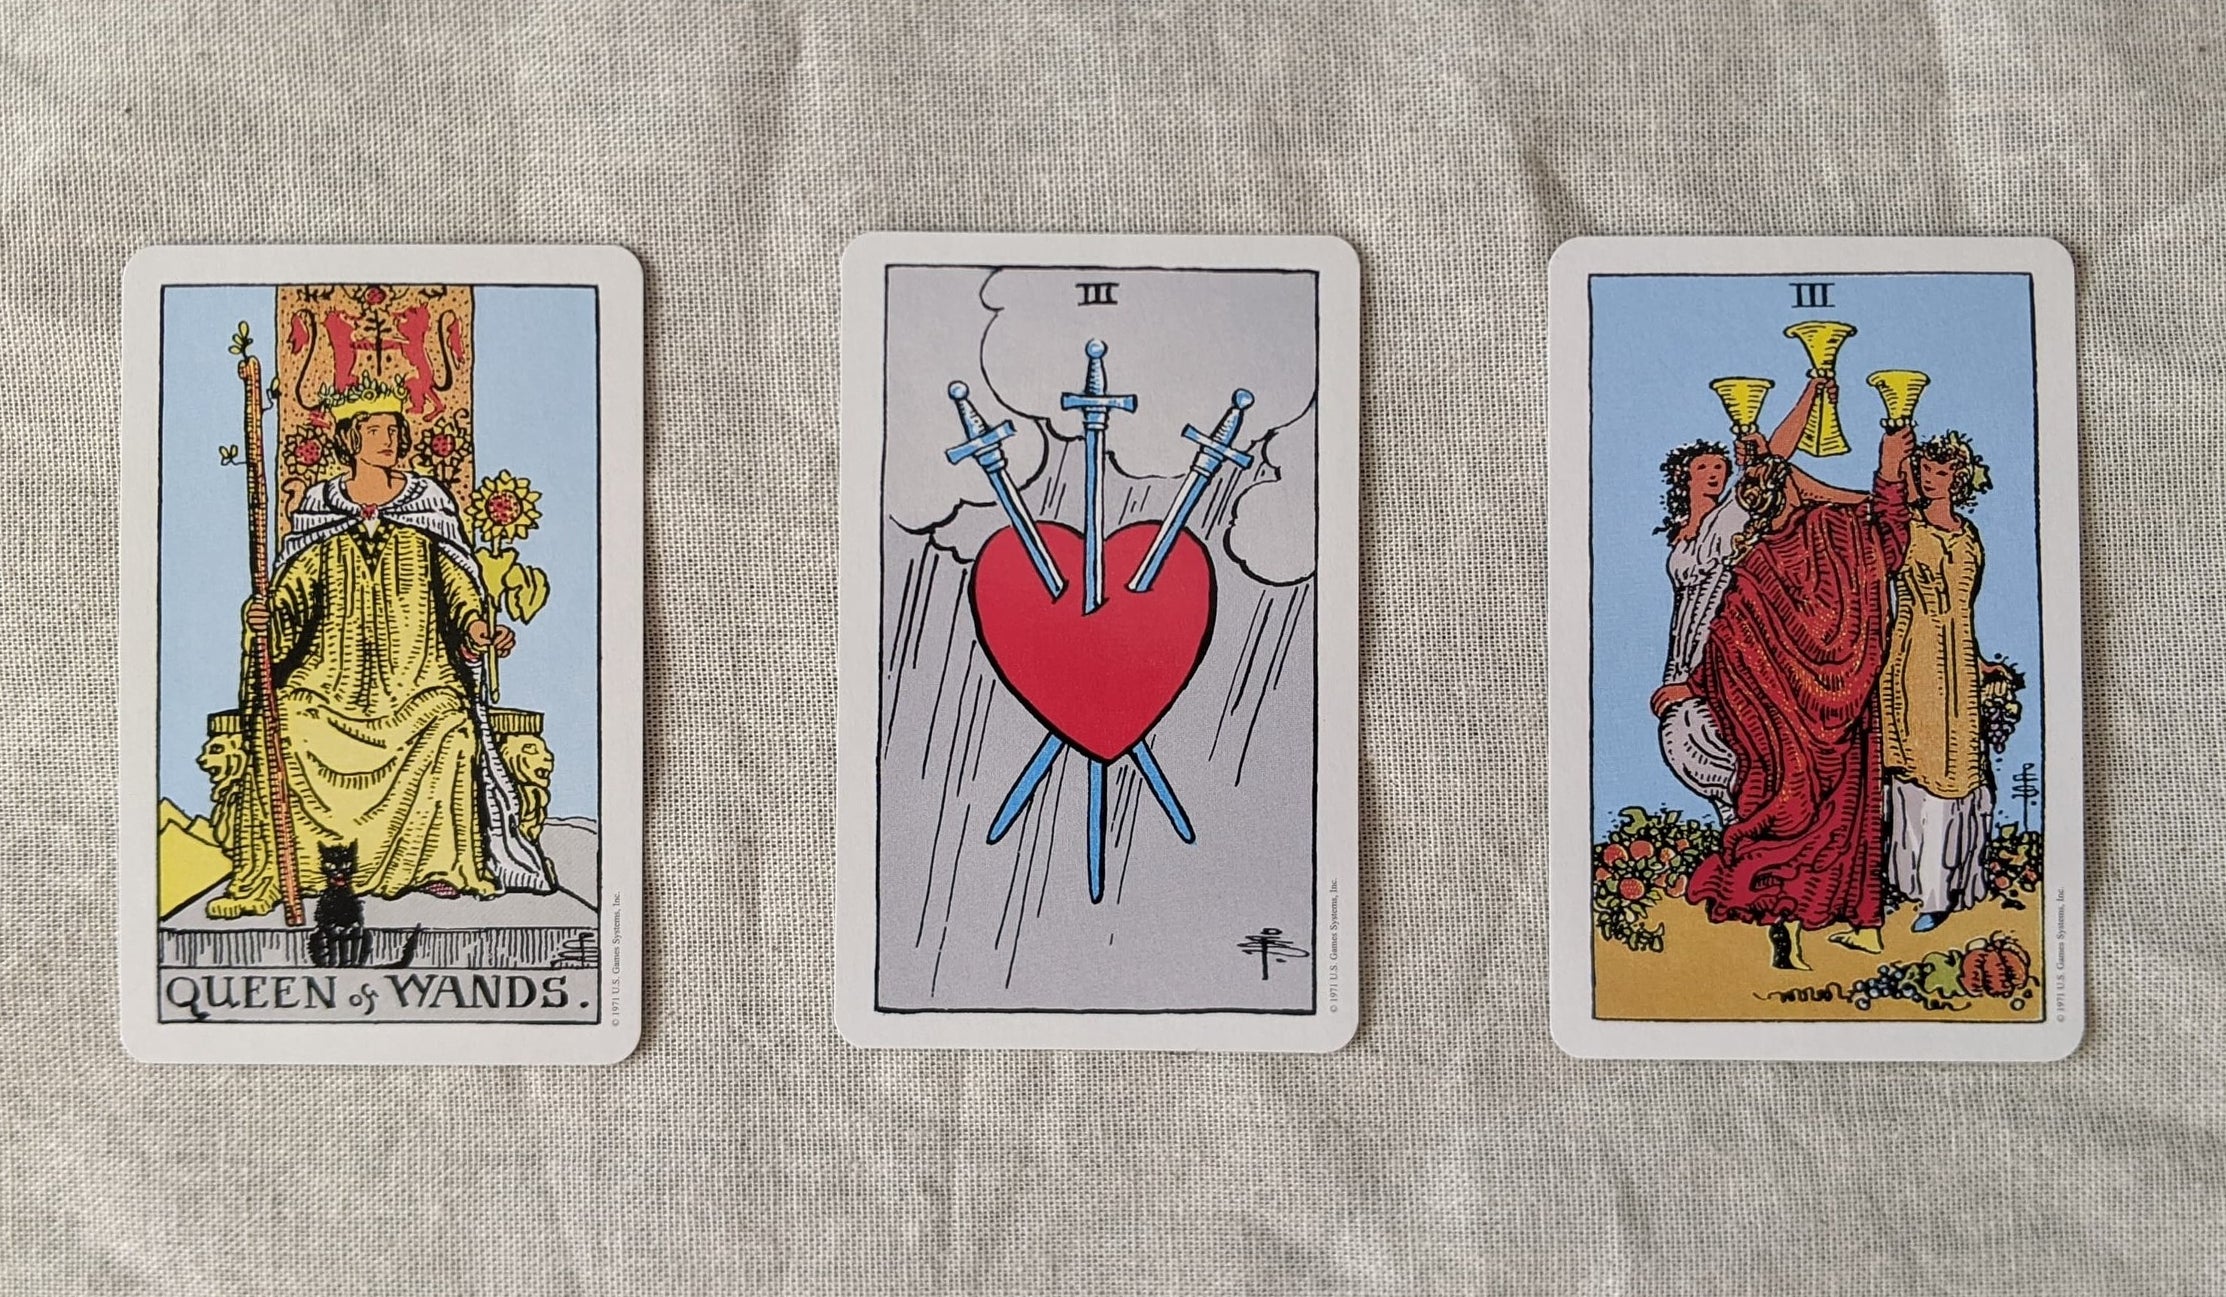 A three card spread, using the Rider-Waite deck, shows the Queen of Wands, the three of swords, and the three of cups from left to right